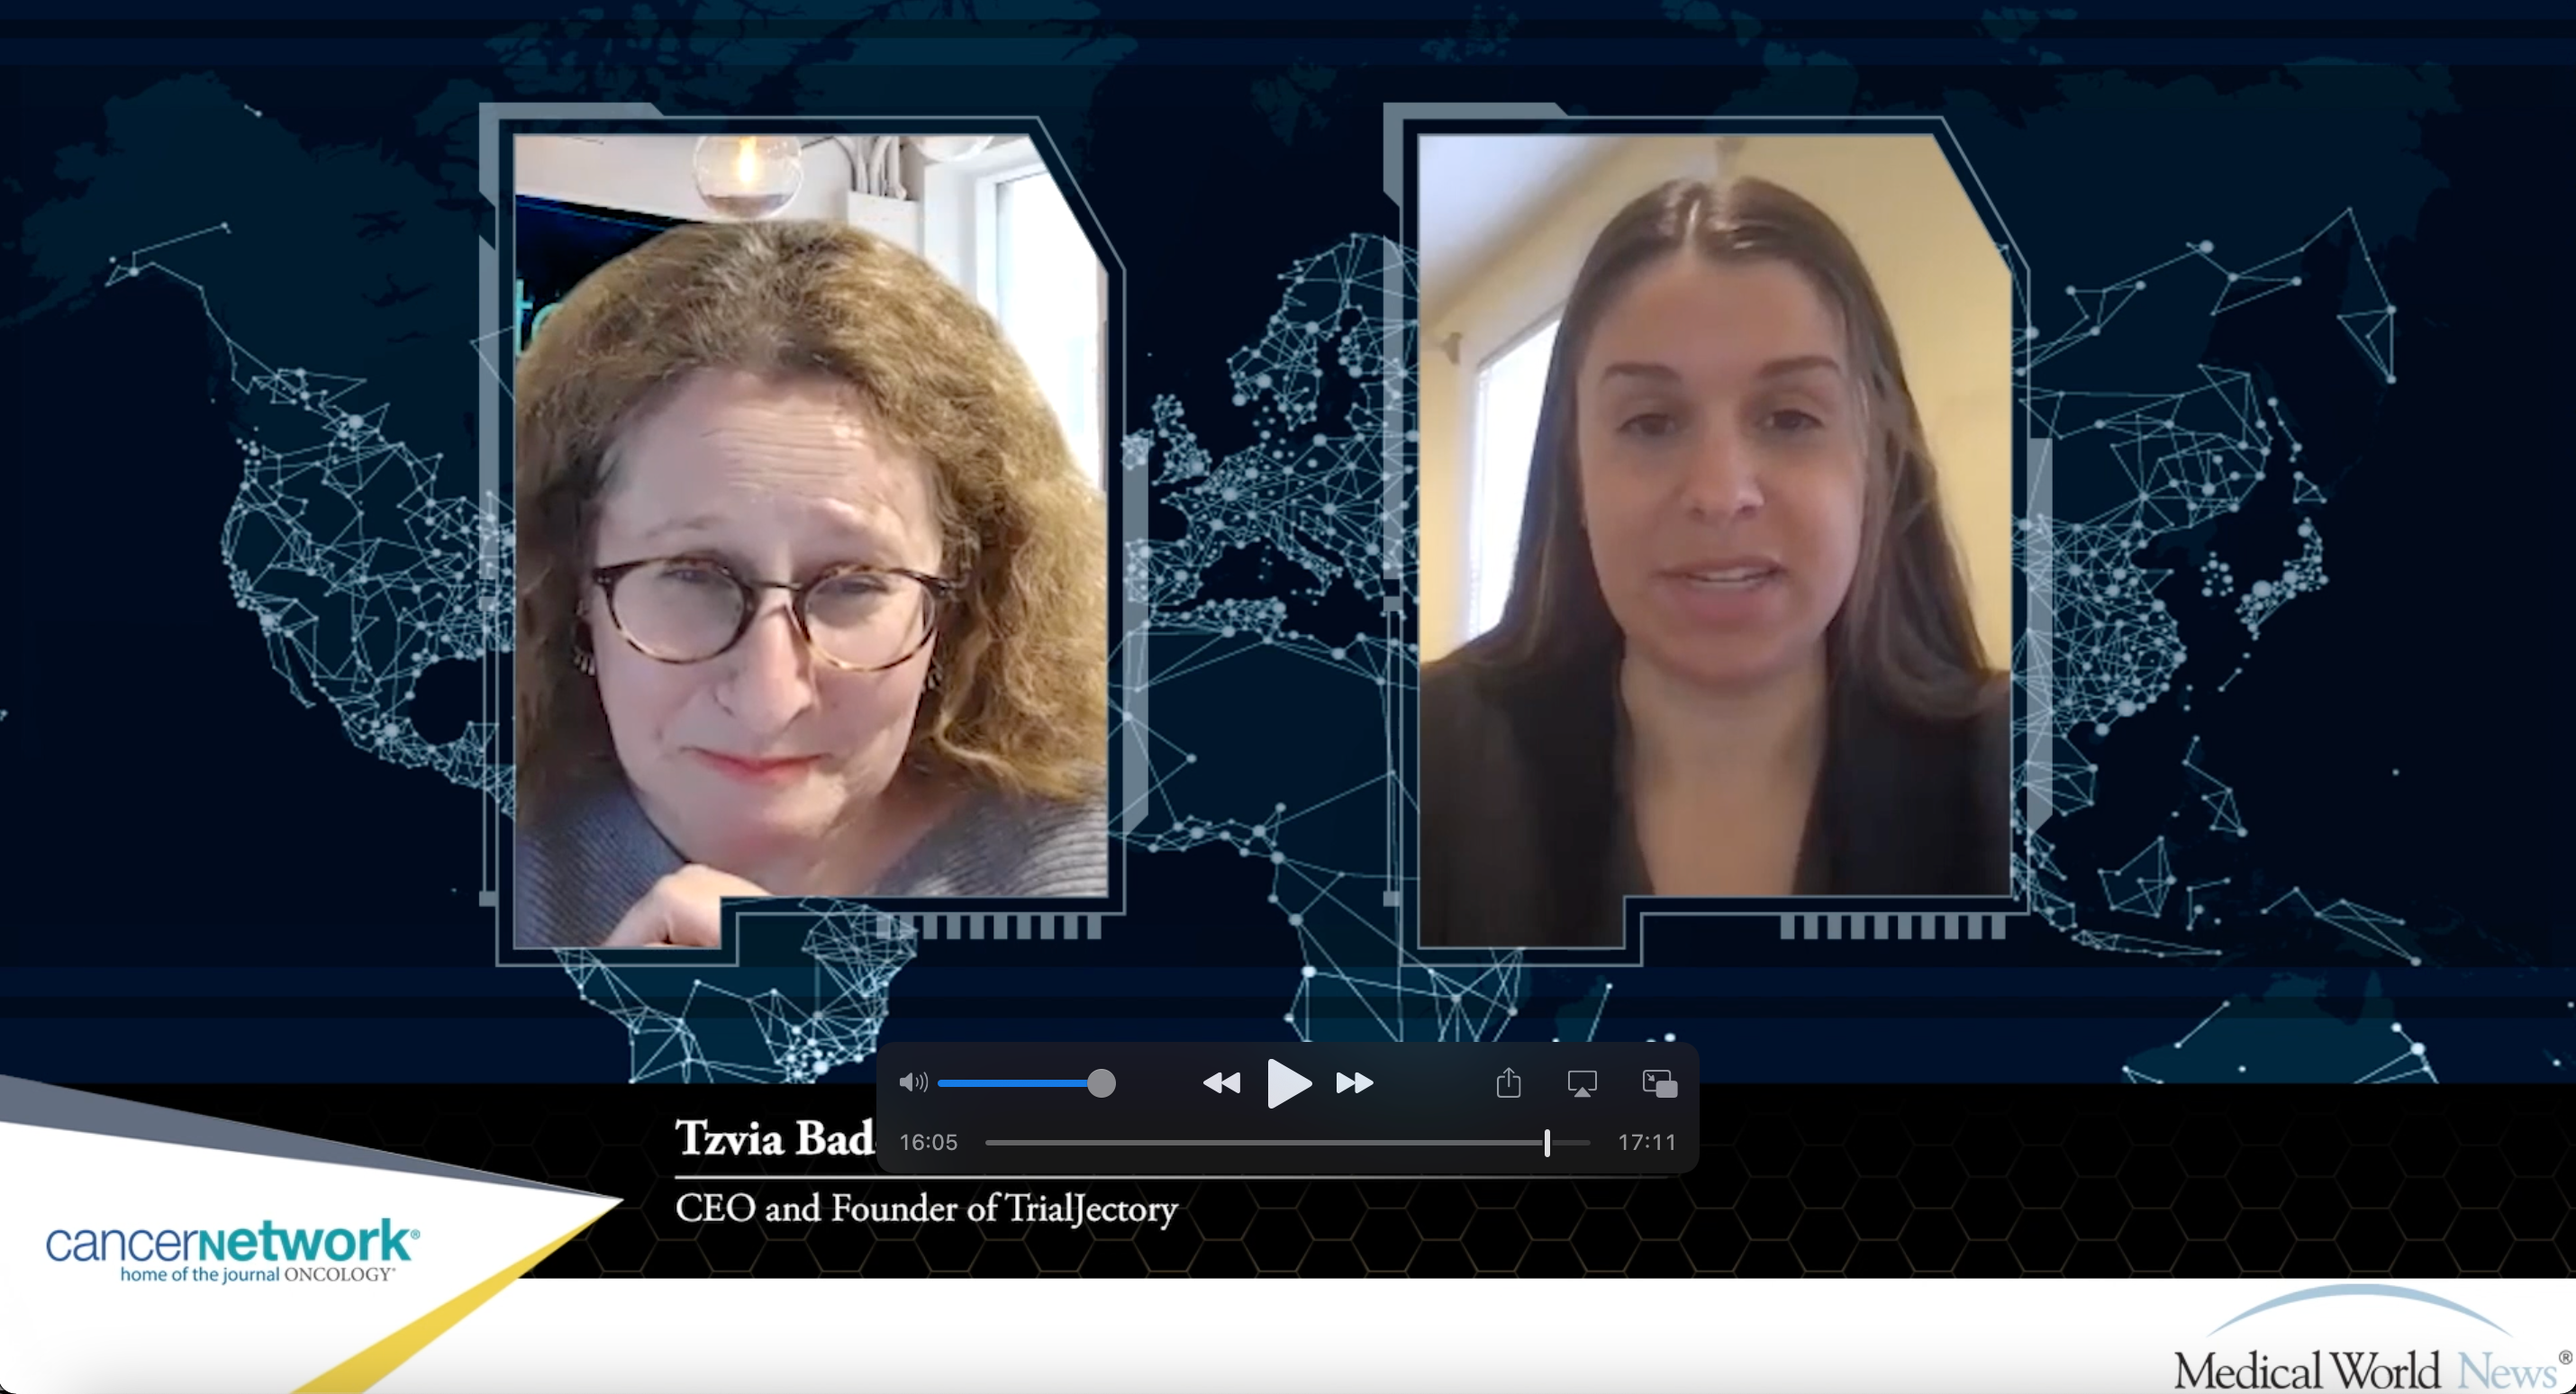 Tzvia Bader Discusses the TrialJectory Platform Connecting Patients With Cancer to Clinical Trials 